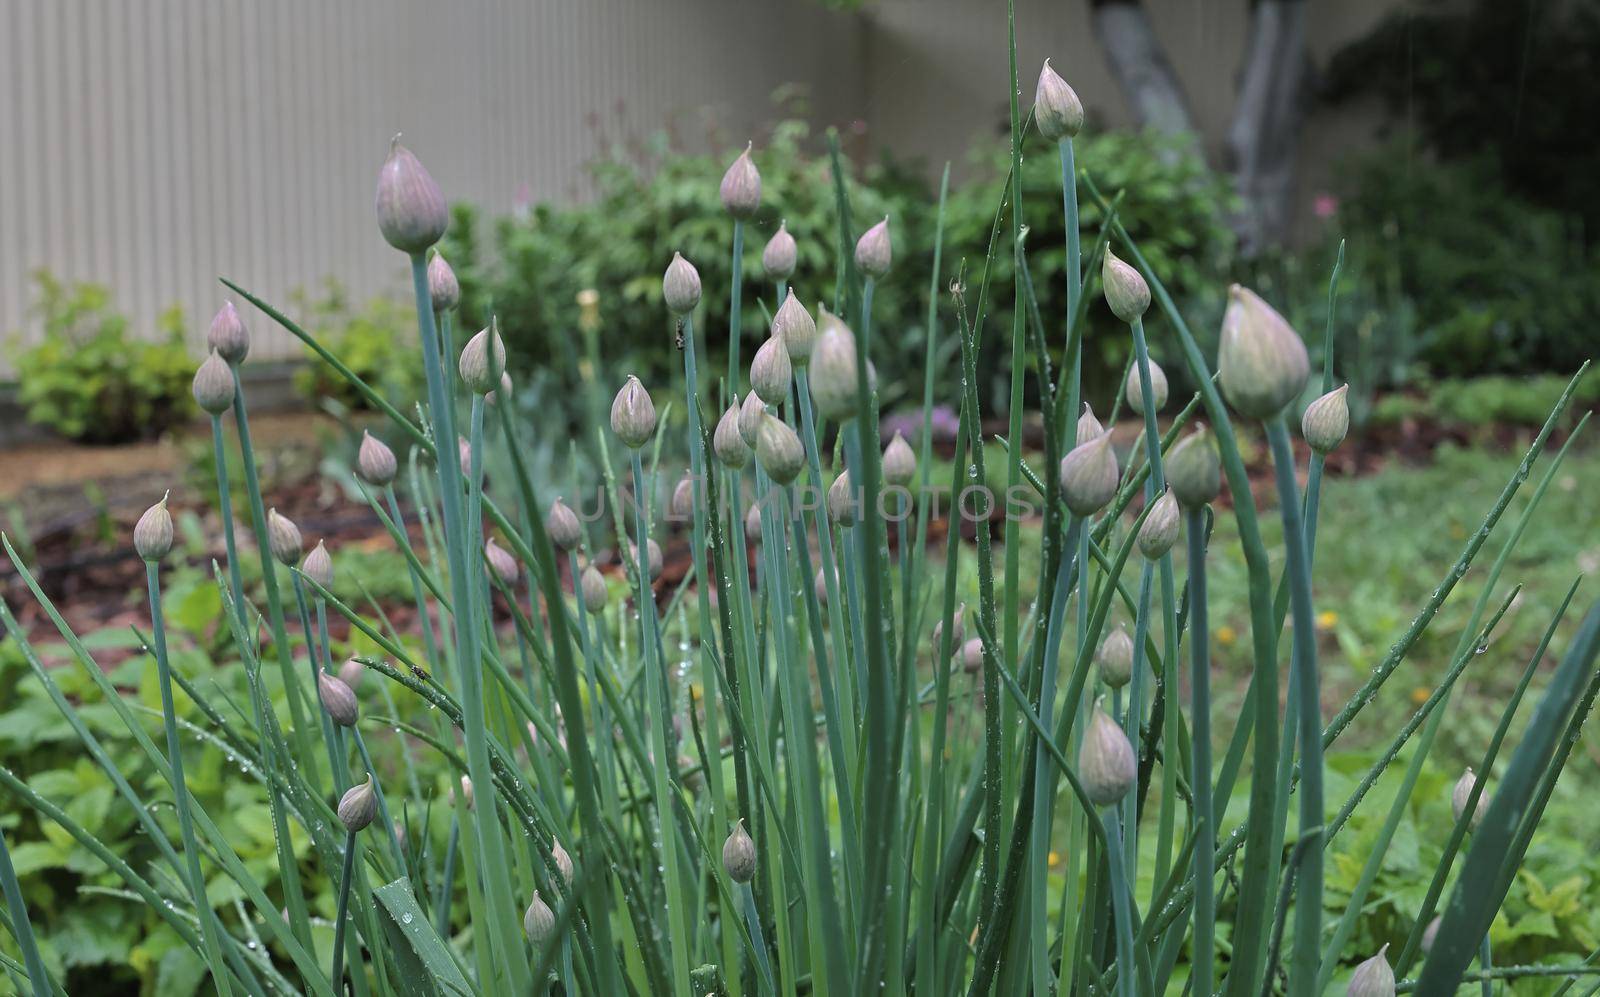 Lush chives with purple buds in the garden. Bud of purple chives plant in spring garden. Perfect healthy herb flowers.